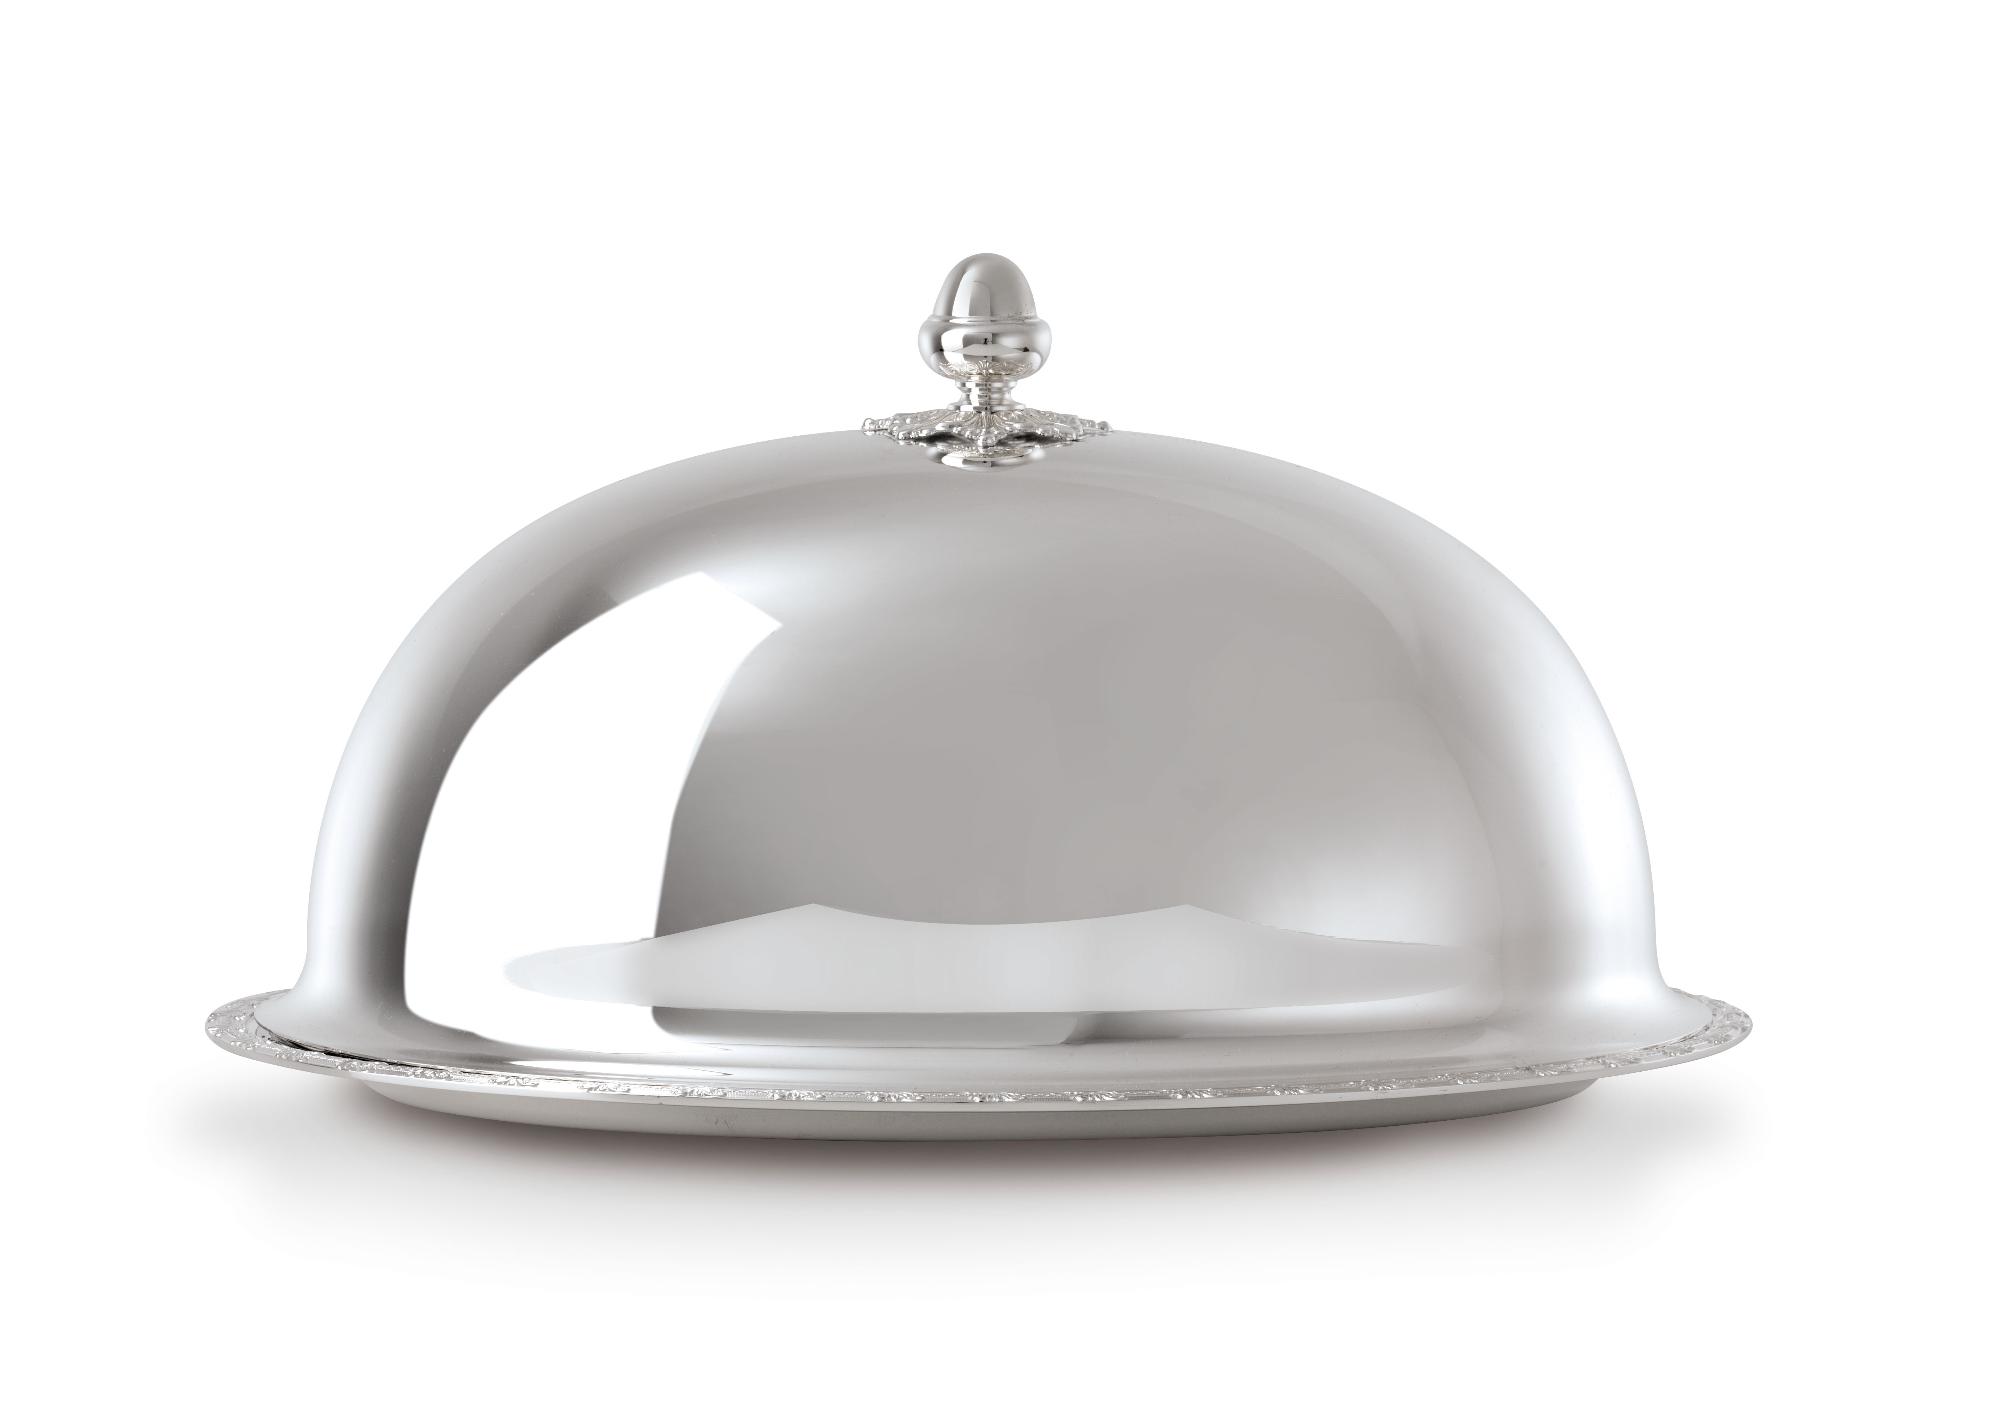 Royal Silver Oval Serving Tray with Lid